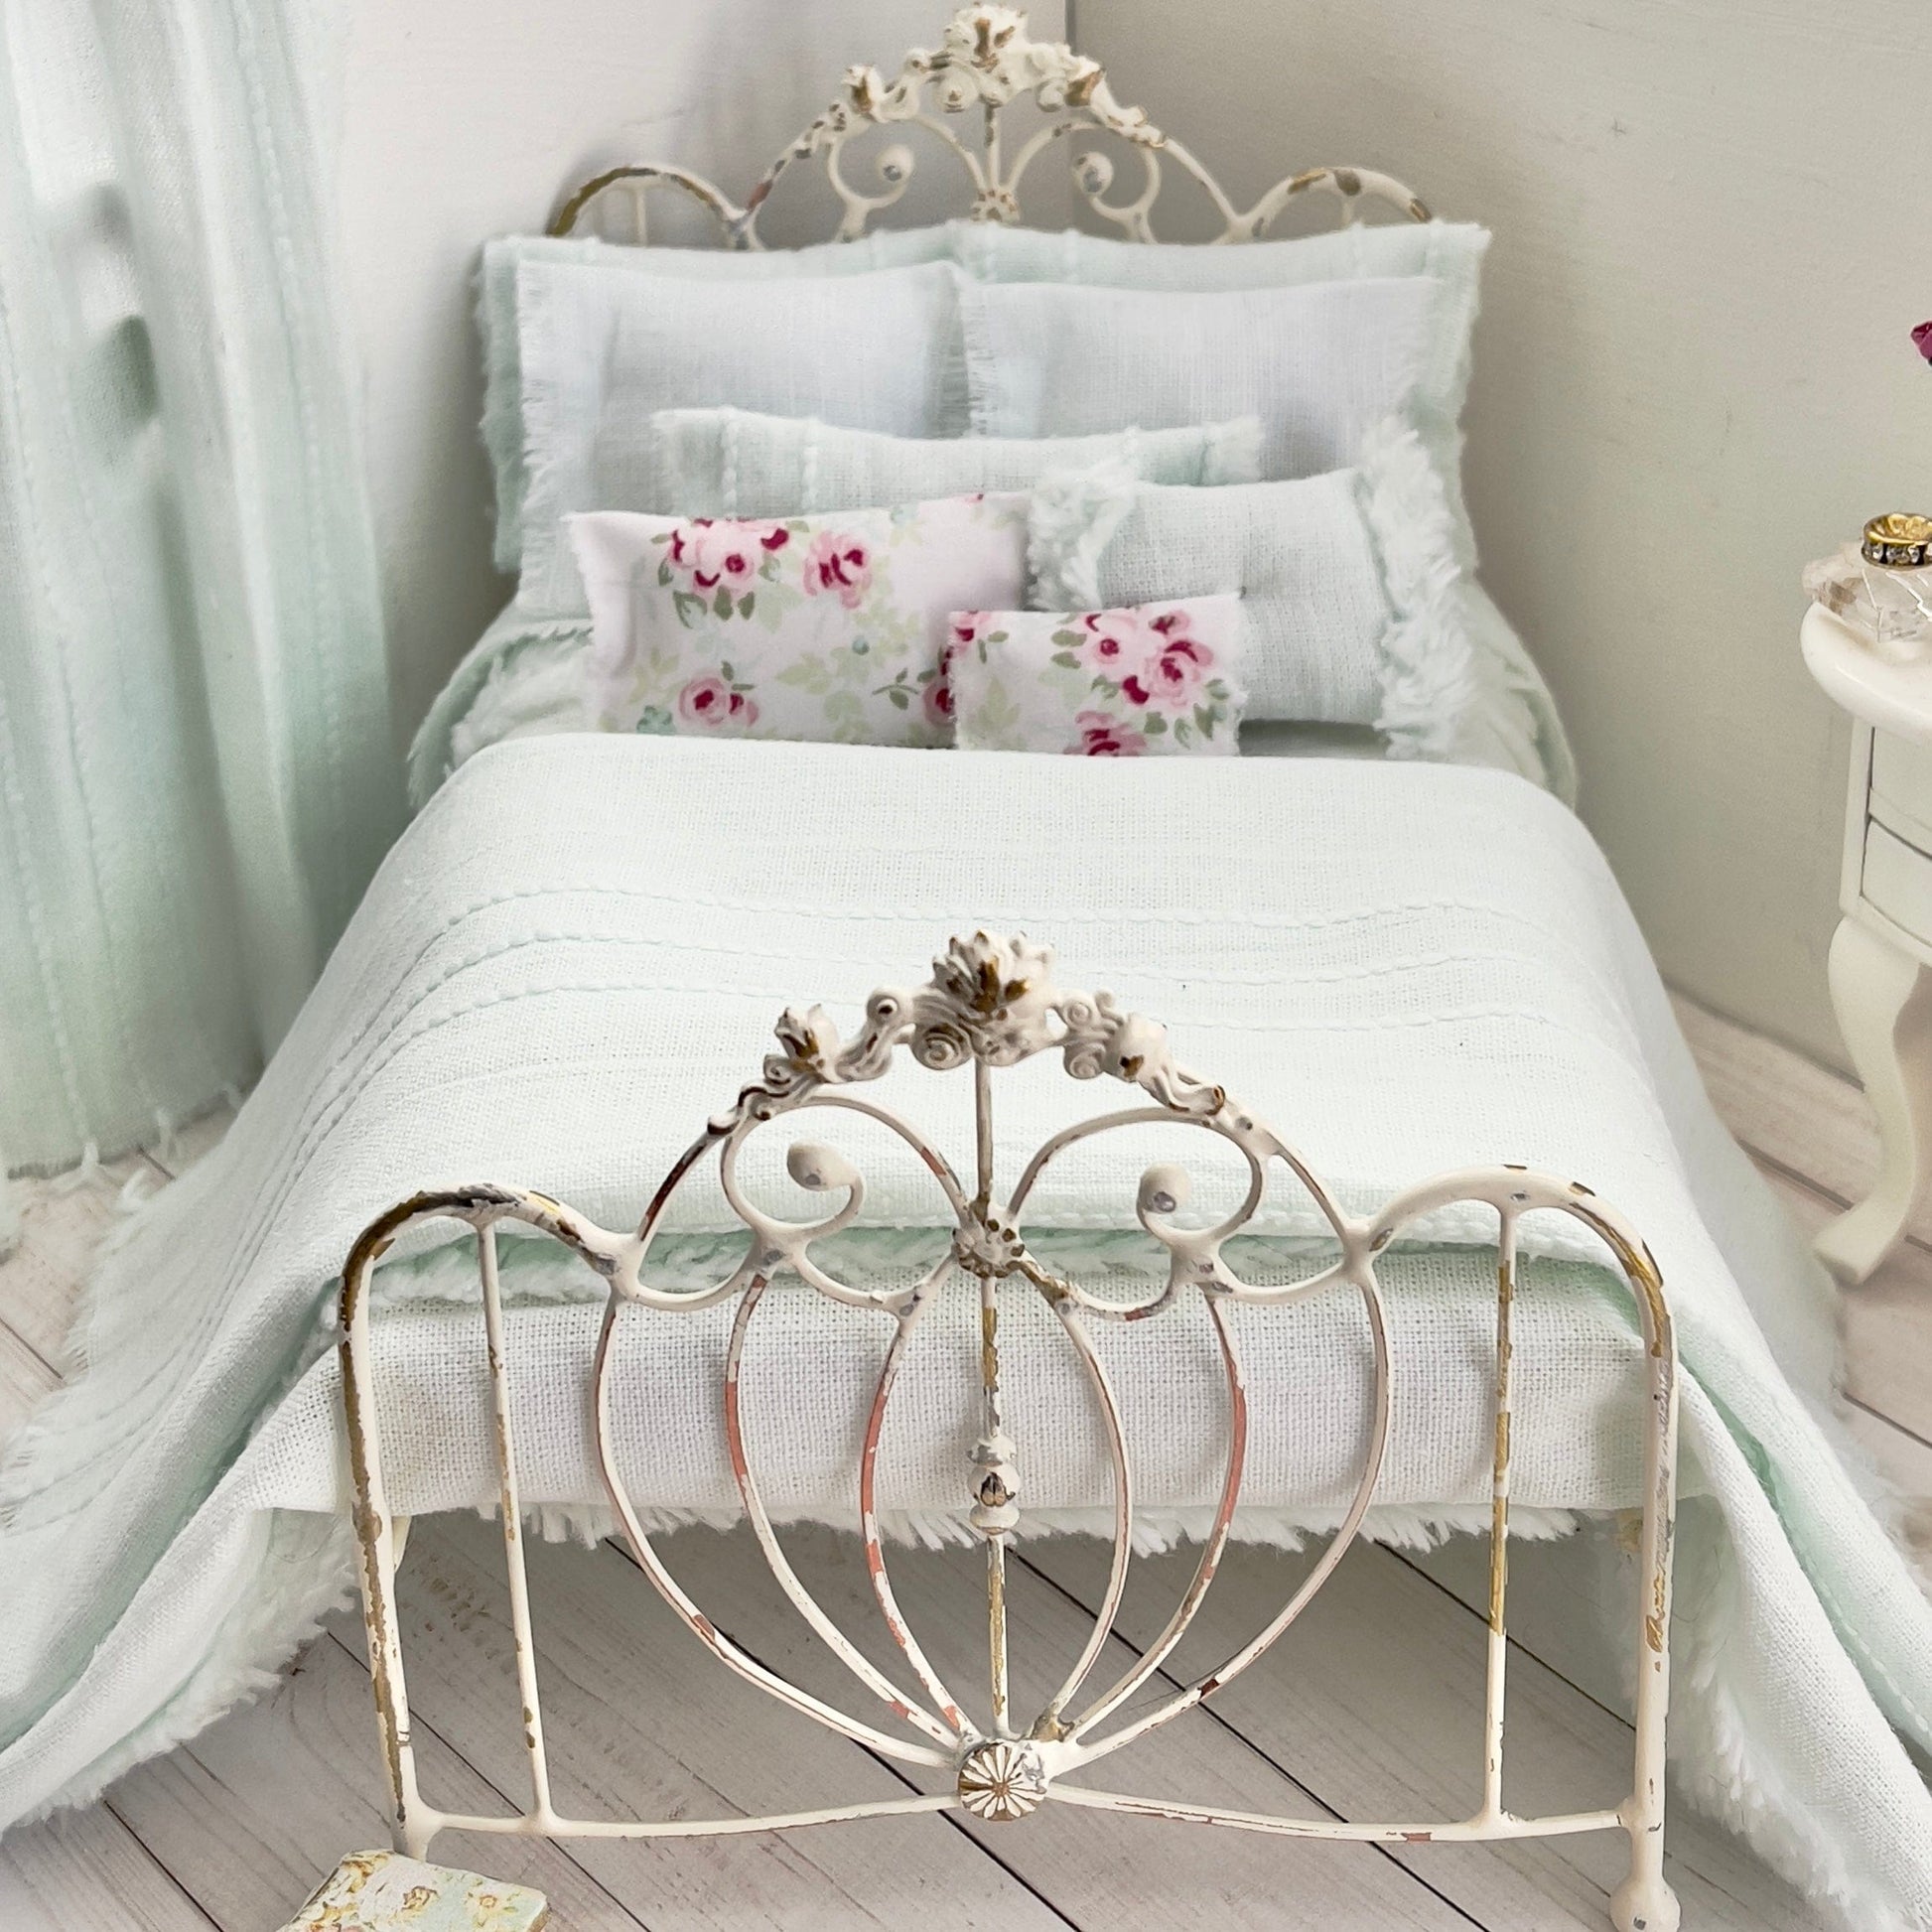 Chantallena White Bed Linens Torn & Tattered- Ten Piece Hand Frayed Pale Green Cotton Chenille Bedspread Set | Shawna